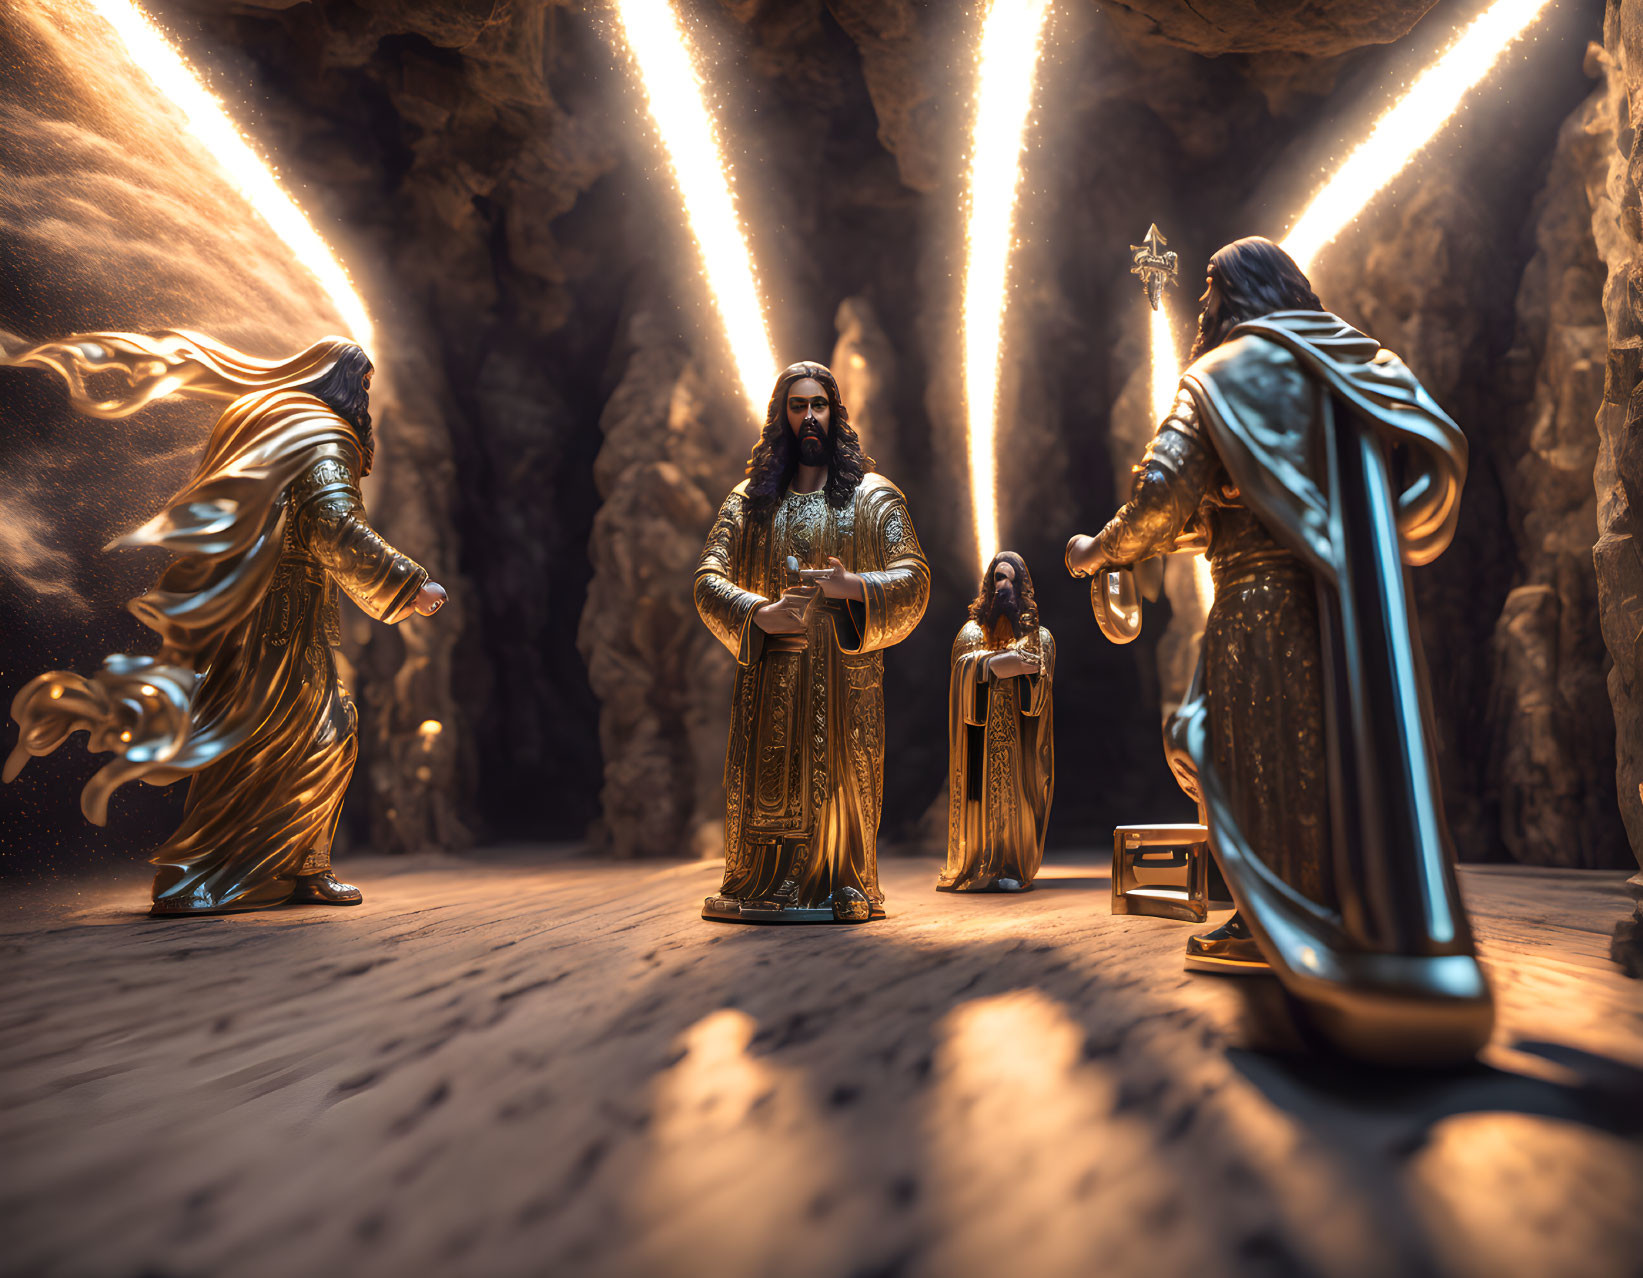 Three ornate gold-clad biblical Magi figures in a cave with light rays.